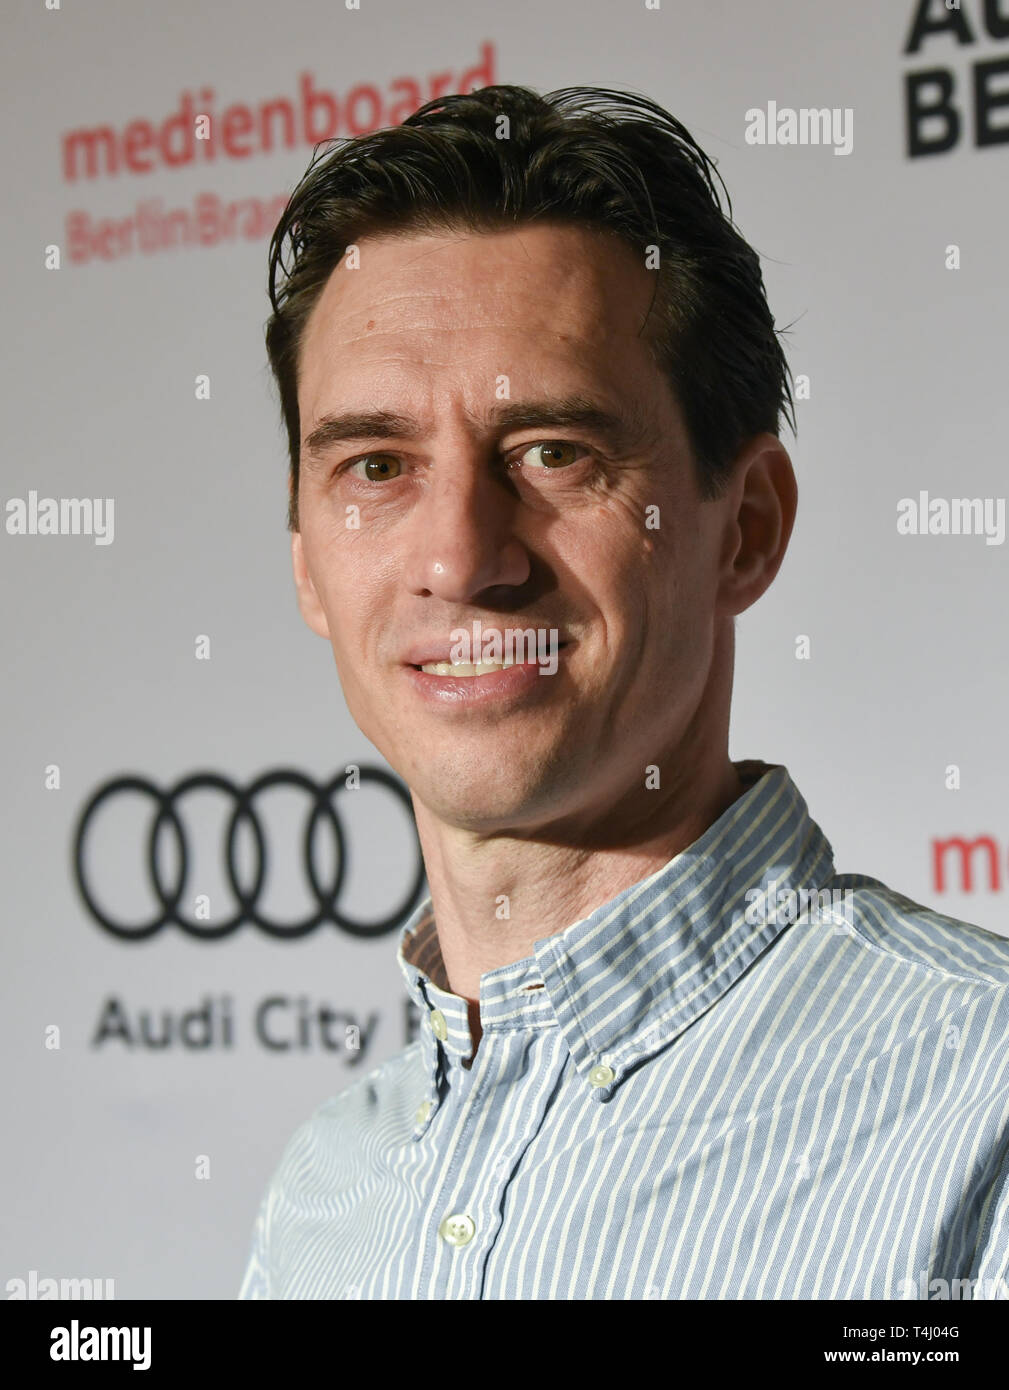 Berlin, Germany. 16th Apr, 2019. The actor Robert Glazeder comes to the premiere of the film "Wenn Fliegen träumen" at the film festival "Achtung Berlin" in the cinema Babylon. The road movie is the directing debut of Katharina Wackernagel. Credit: Jens Kalaene/dpa-Zentralbild/ZB/dpa/Alamy Live News Stock Photo